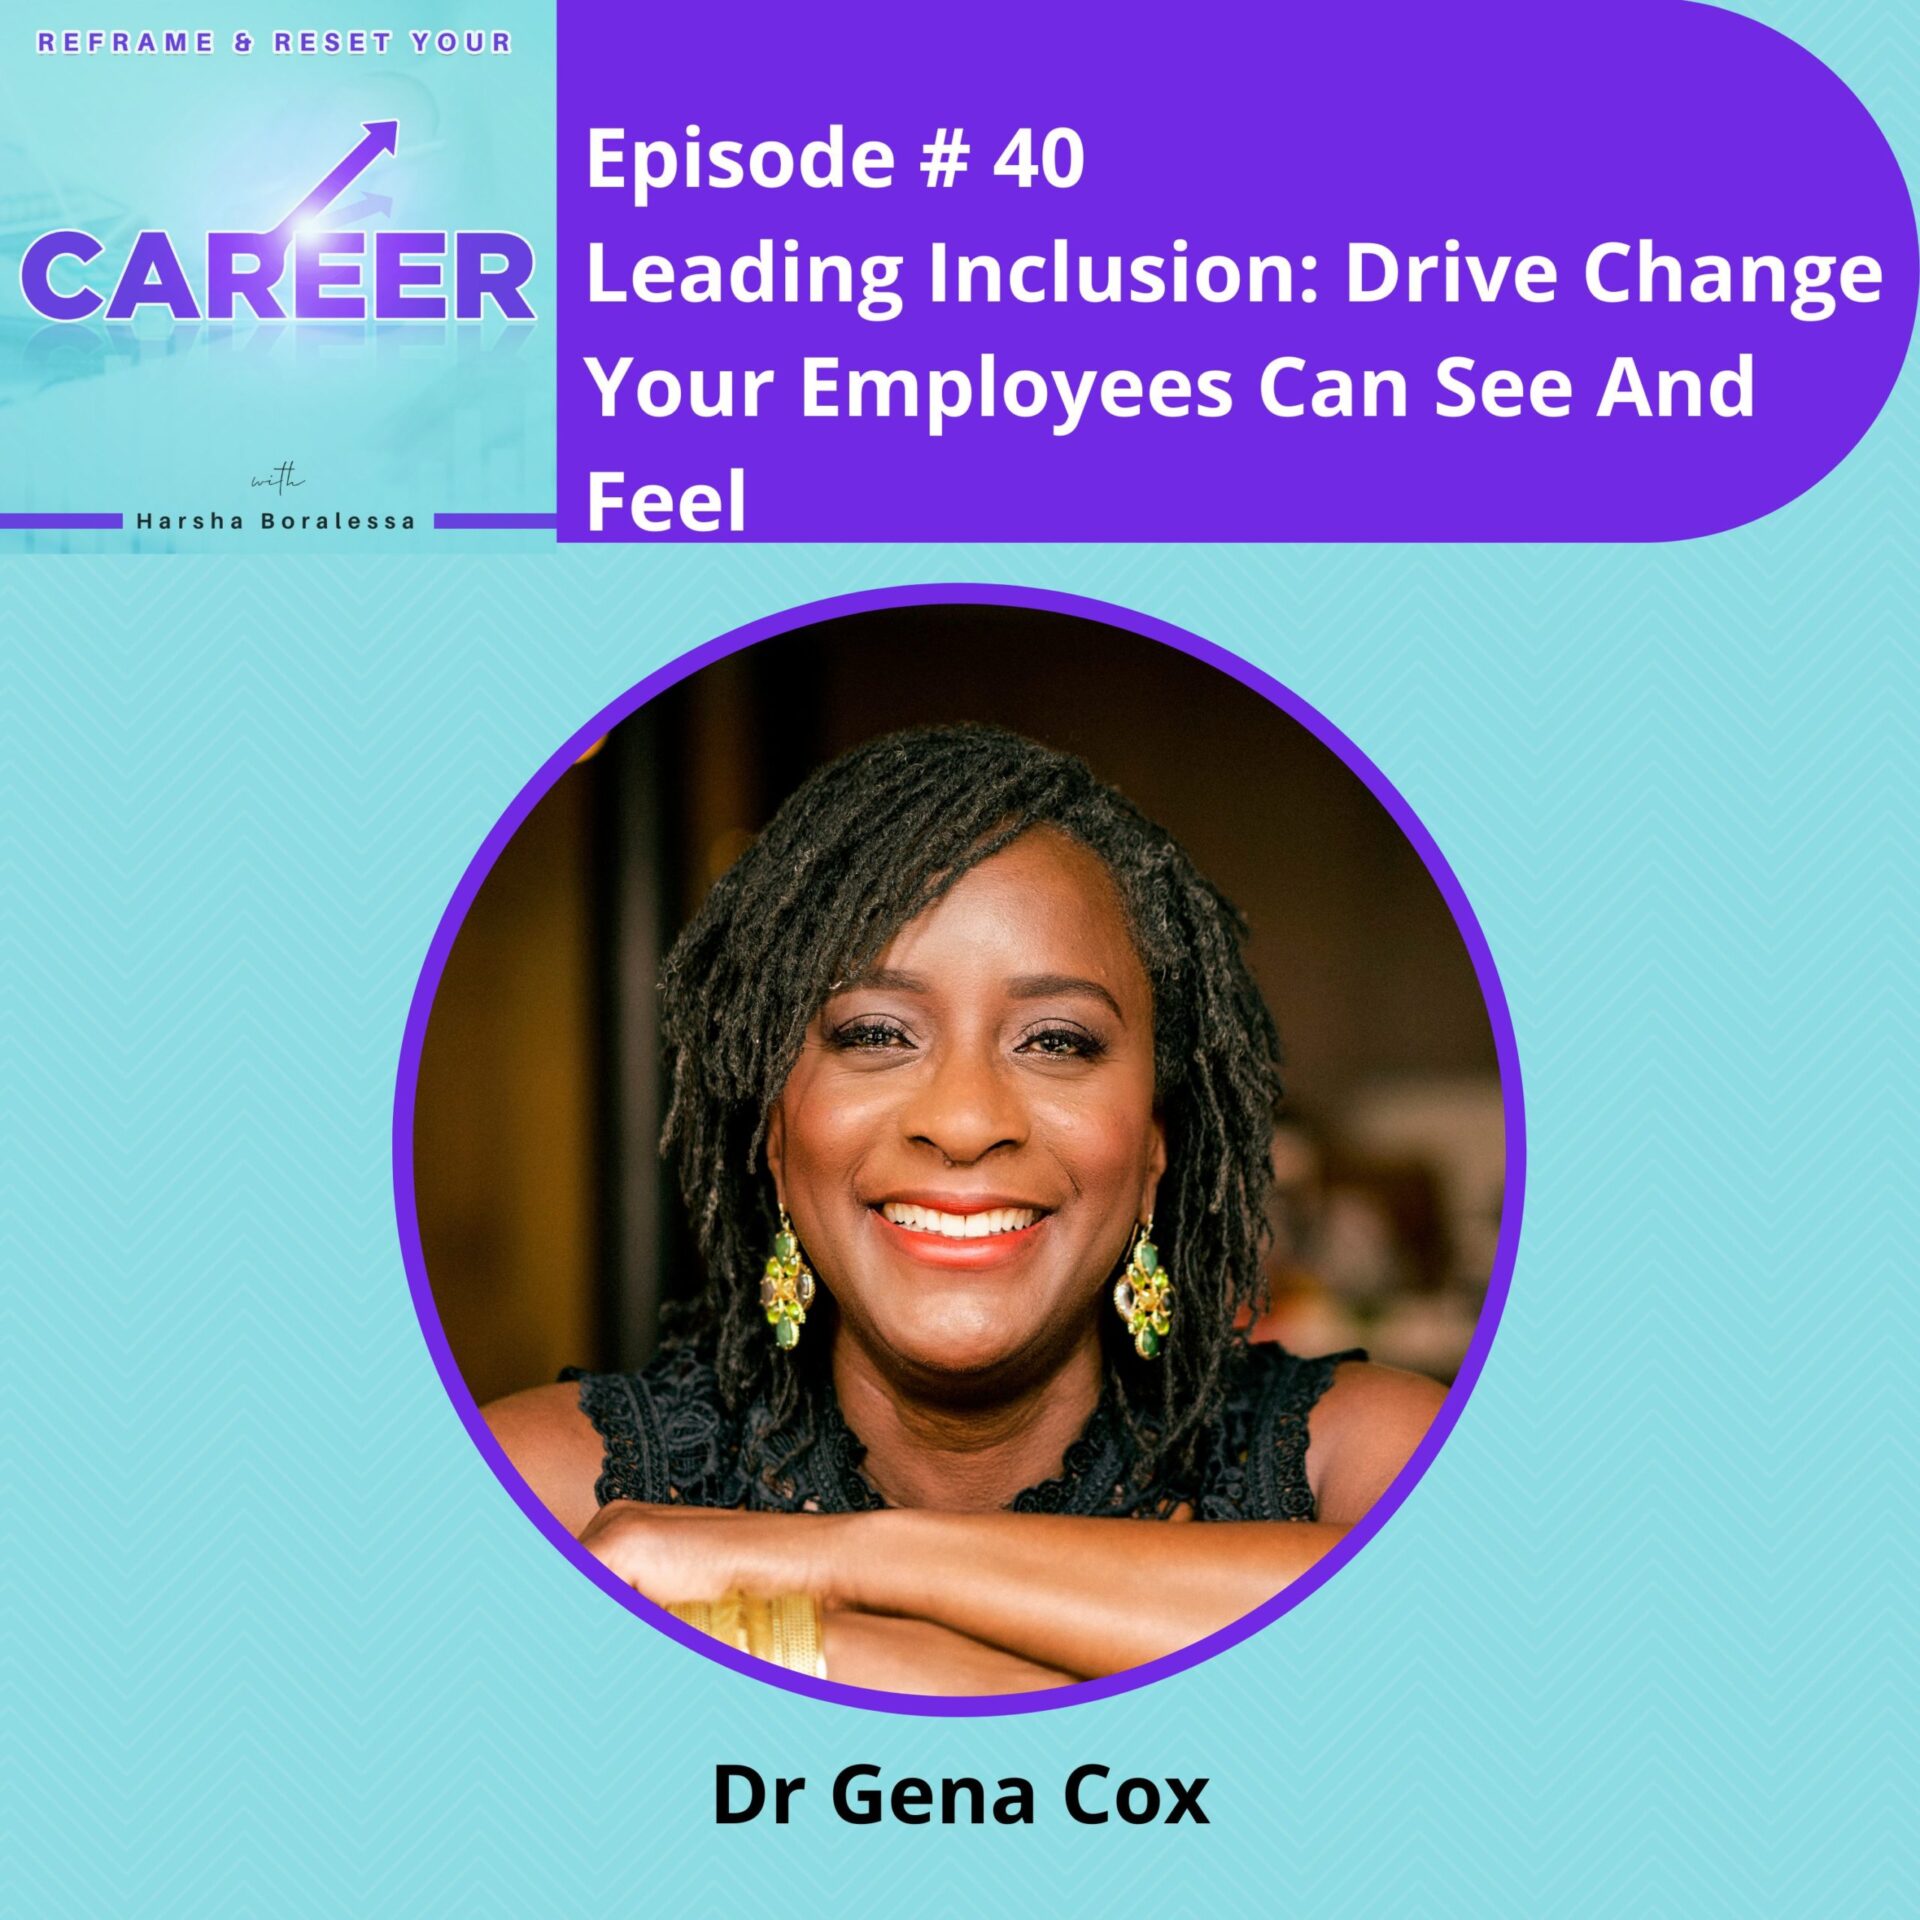 REFRAME & RESET YOUR CAREER 2